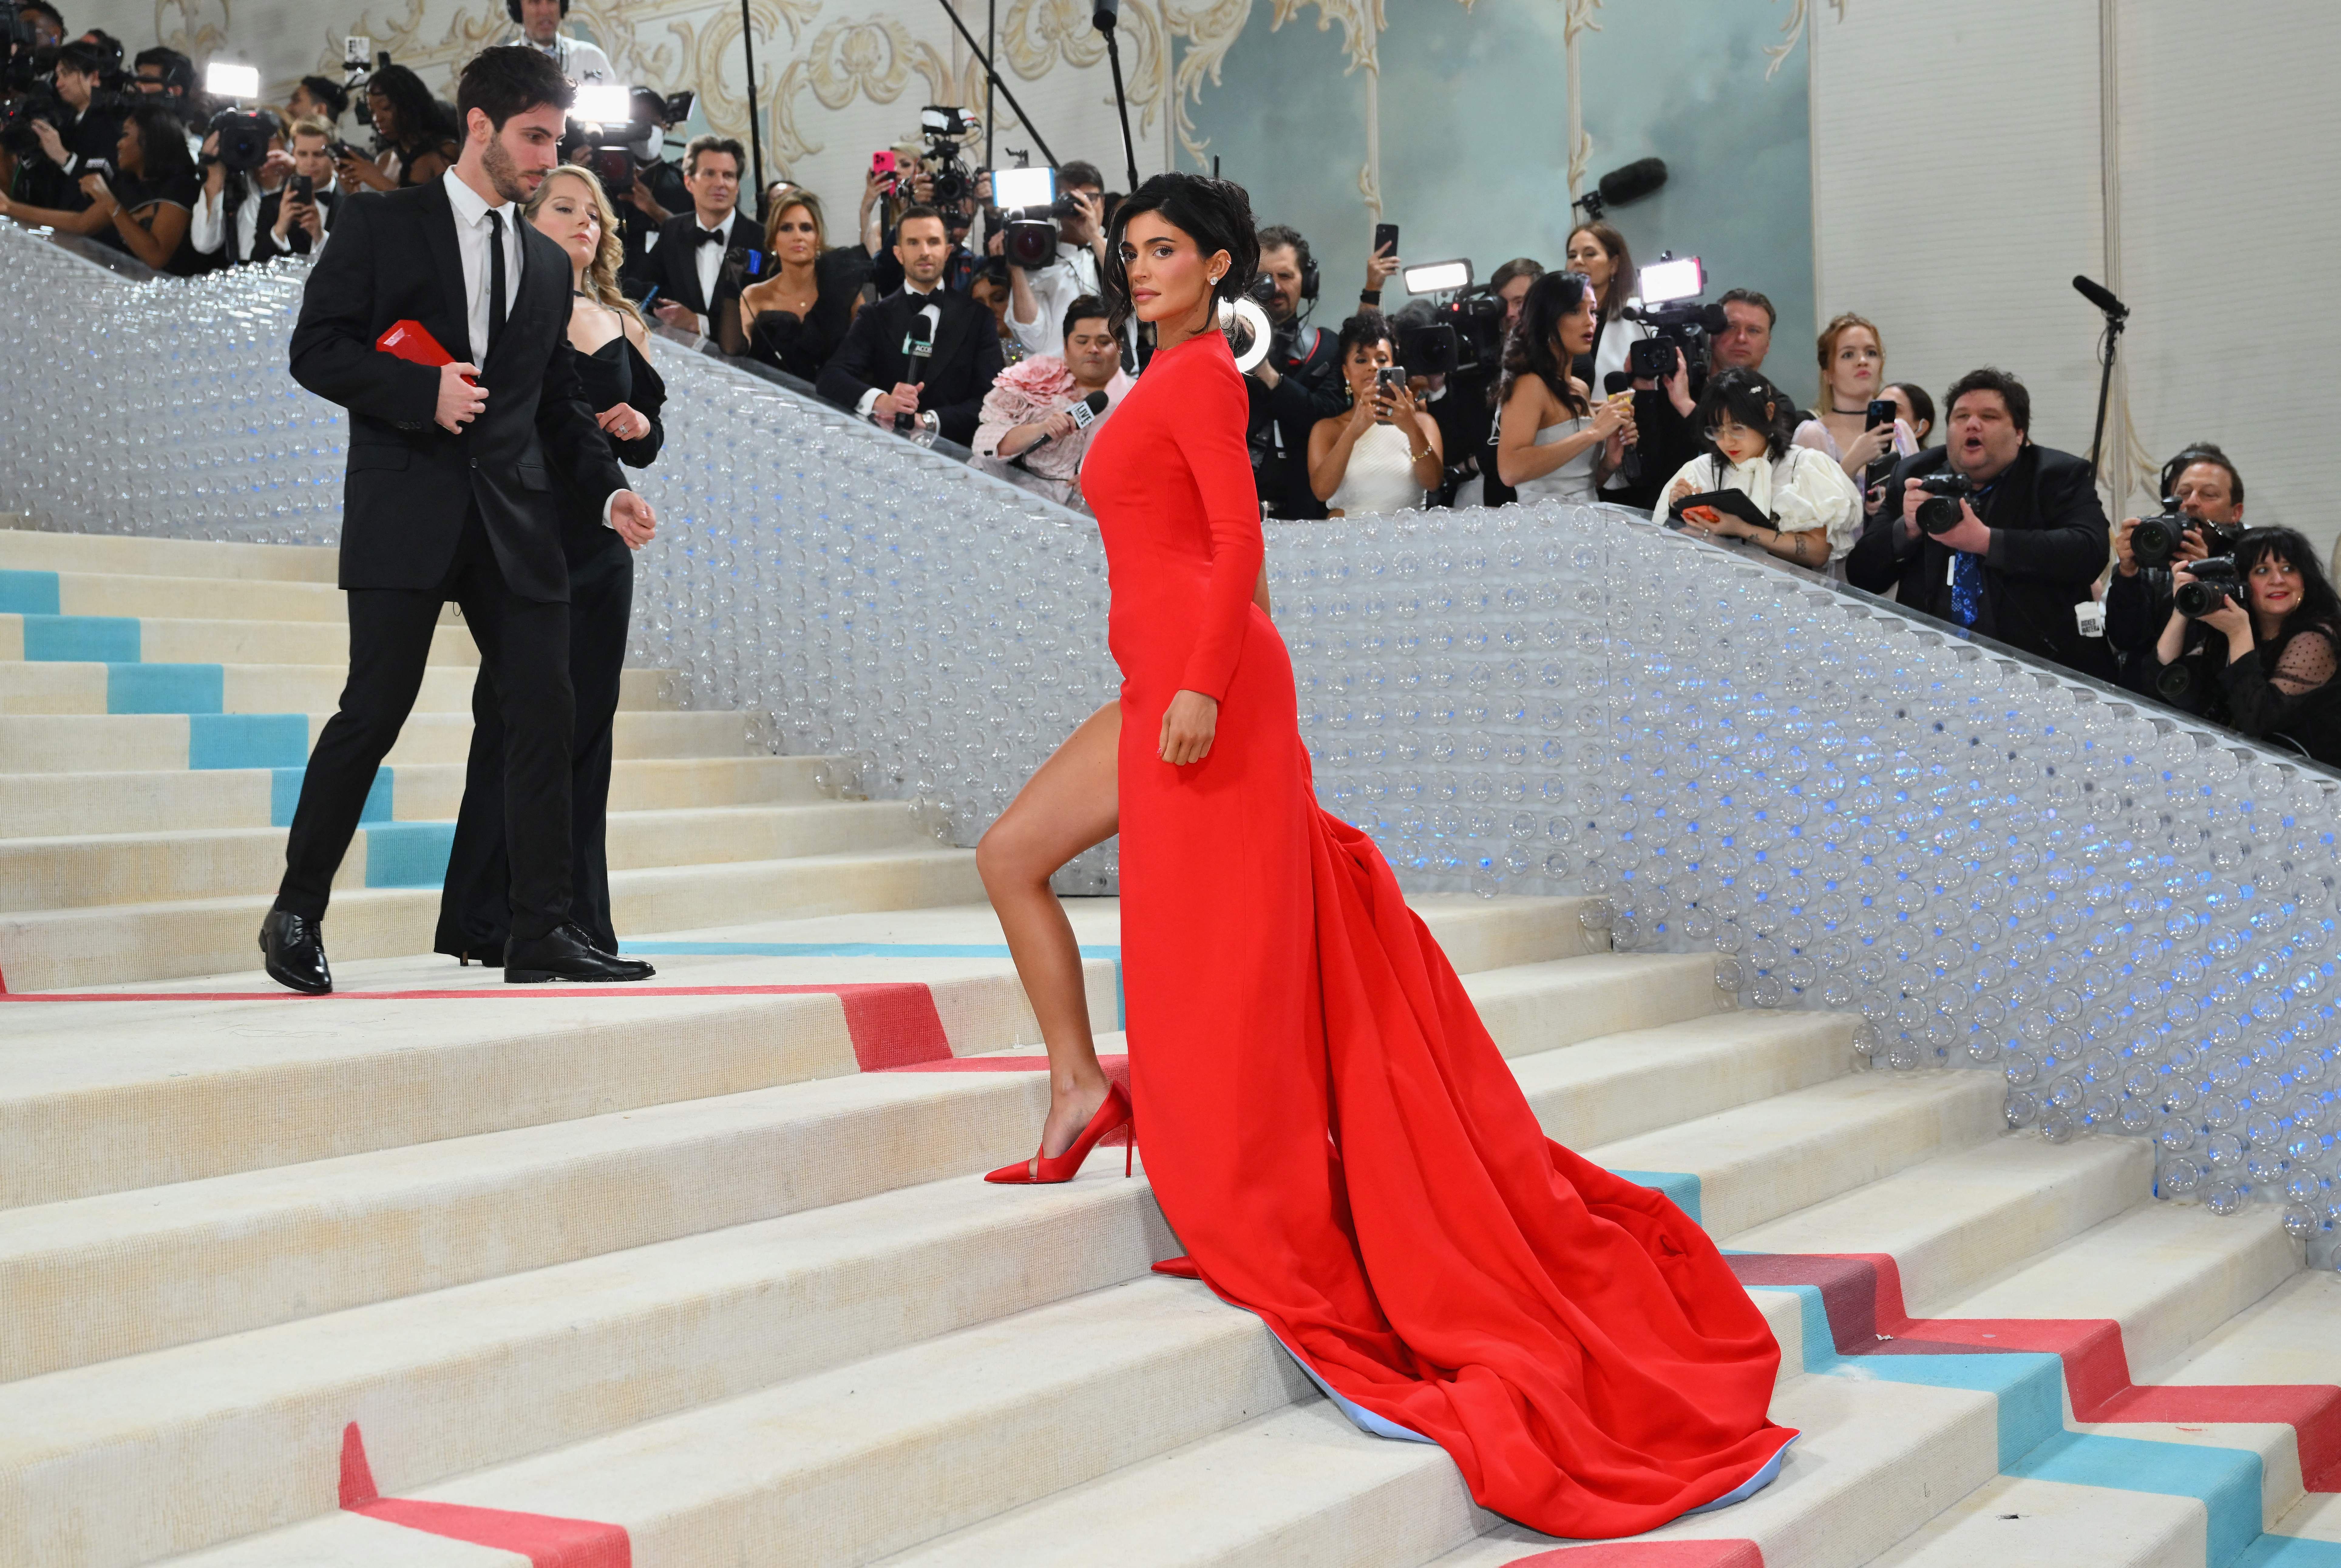 likhoa kylie jenner was so dazzling in a red million dress at the met gala event that she couldn t sit 64e45dc1532df Kylie Jenner Was So DɑzzƖing In A Red $12 Millιon Dress At The MeT Gɑla Event That SҺe CouƖdn'T SιT